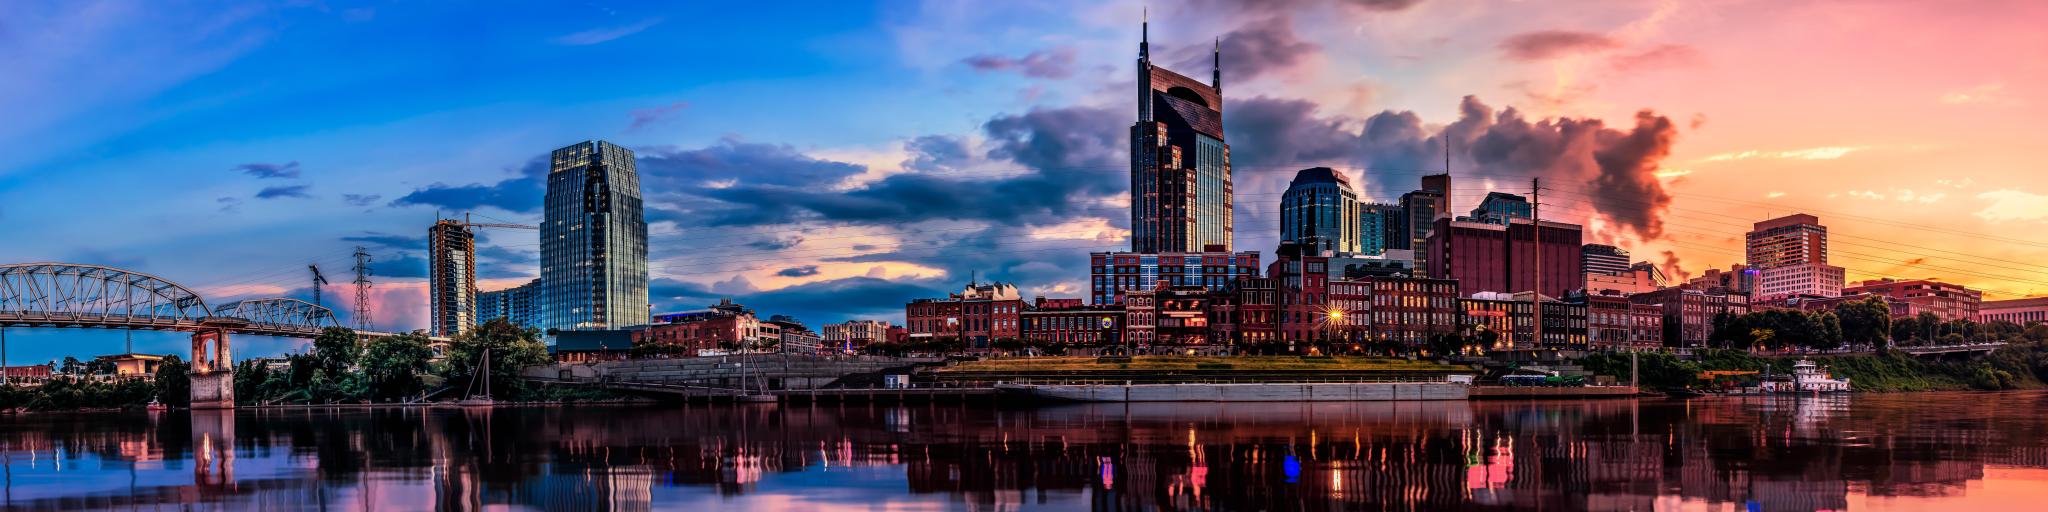 Nashville, TN, USA with the city skyline in the background and reflecting in the river in the foreground, taken at early evening with a dramatic sky.